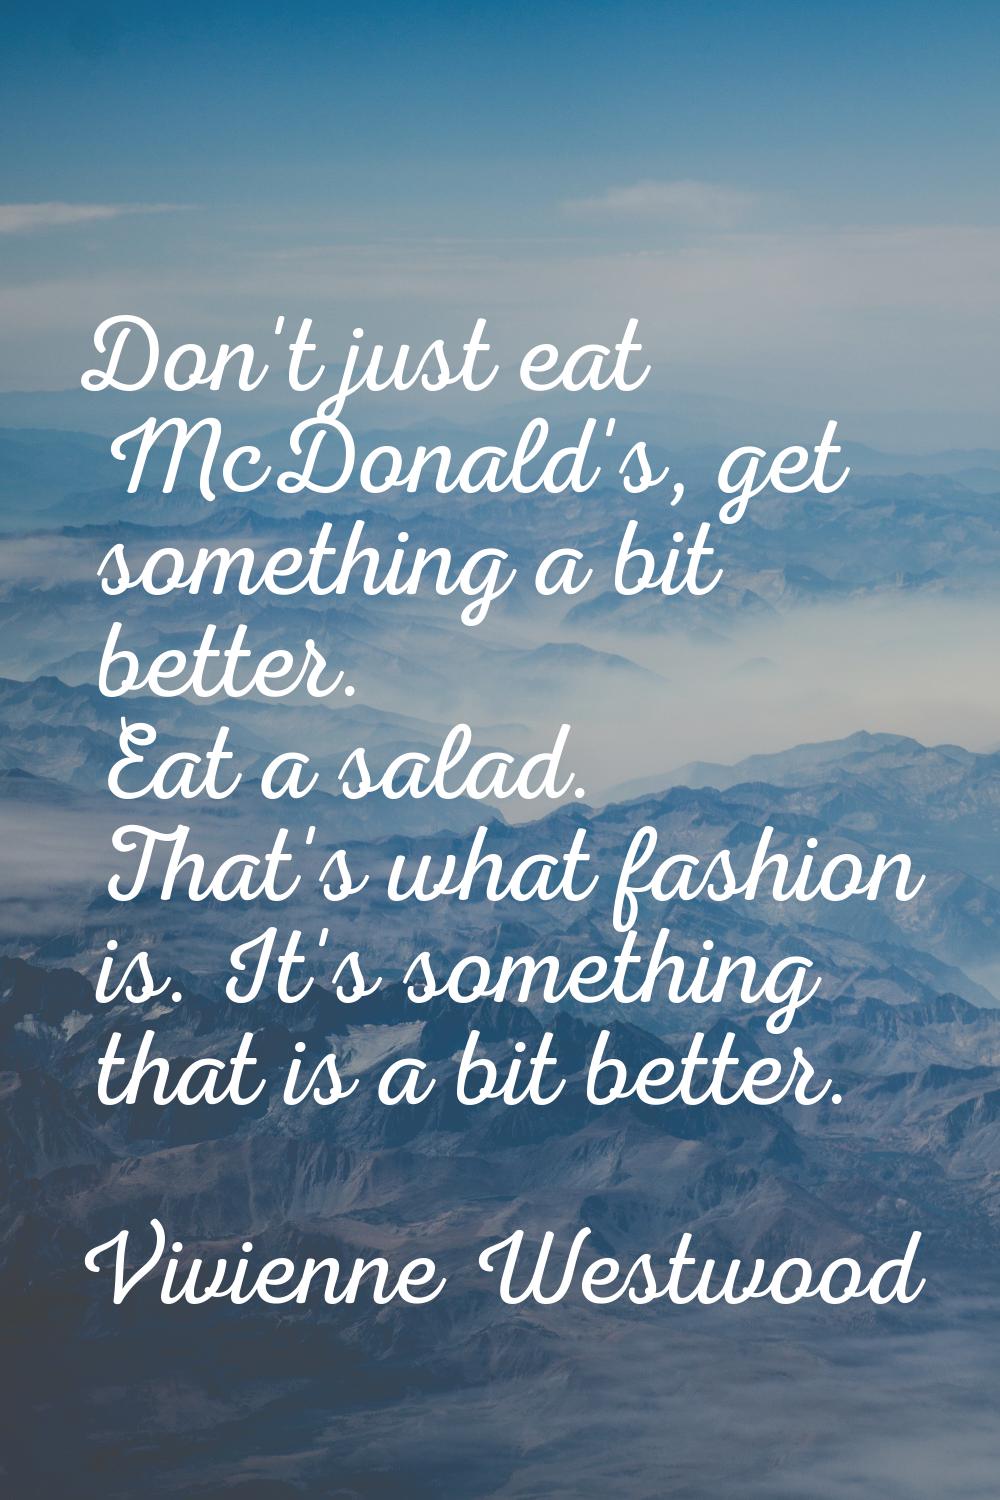 Don't just eat McDonald's, get something a bit better. Eat a salad. That's what fashion is. It's so